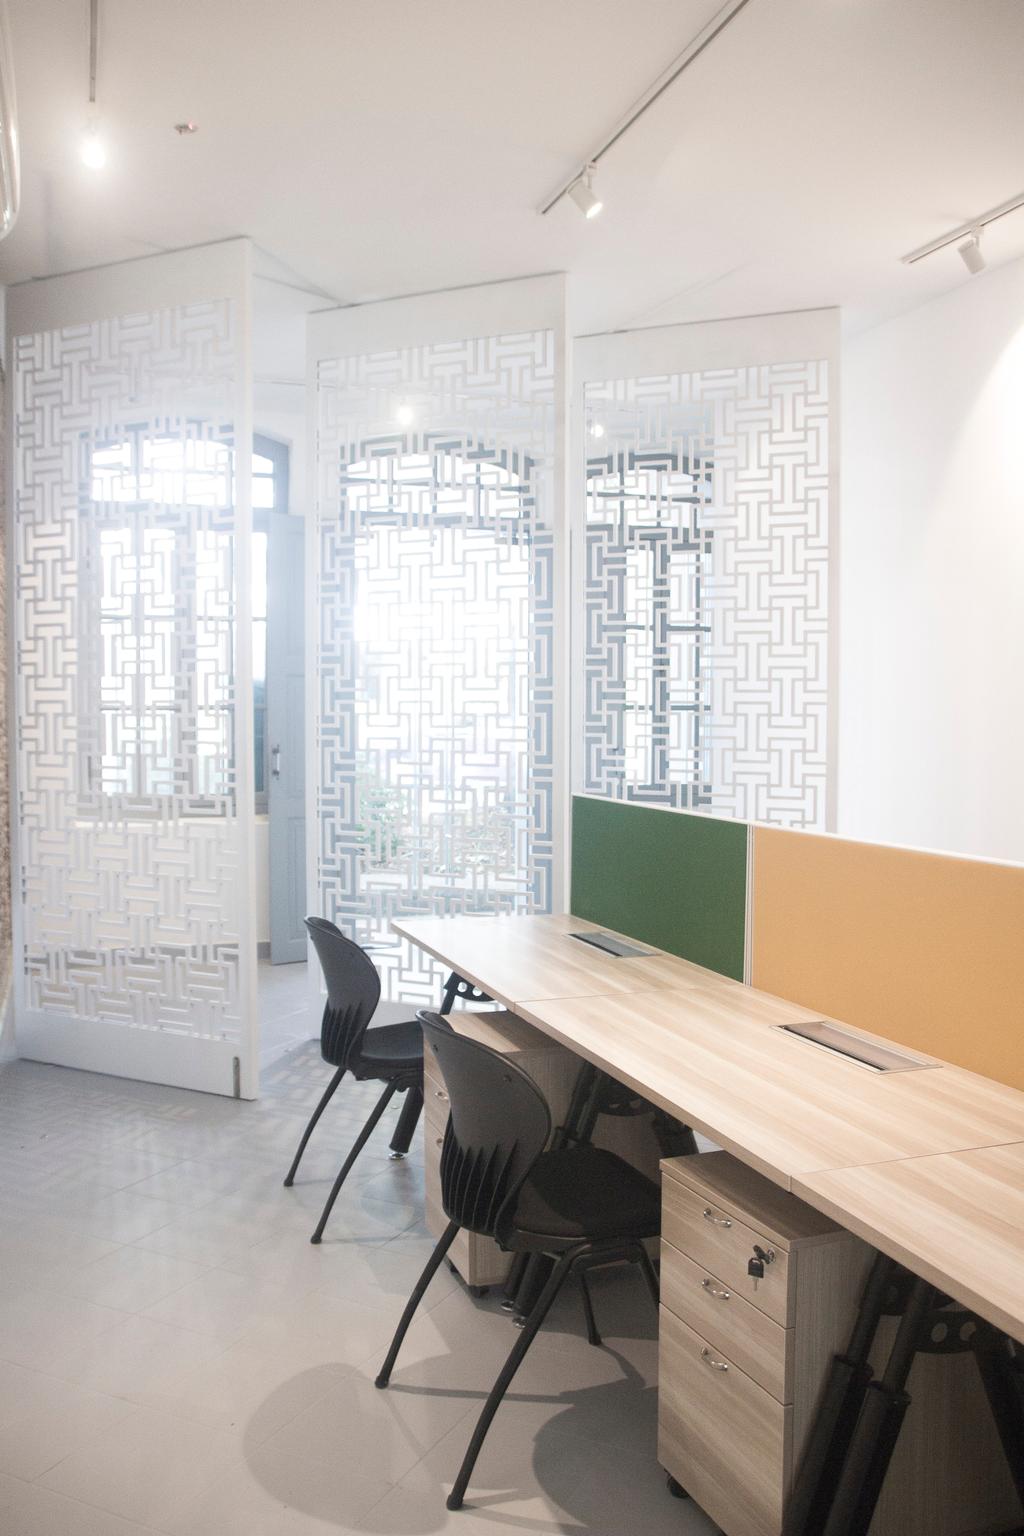 19 Cantonment, Commercial, Architect, PROVOLK ARCHITECTS, Modern, Partition, Patterned Partition, Bench